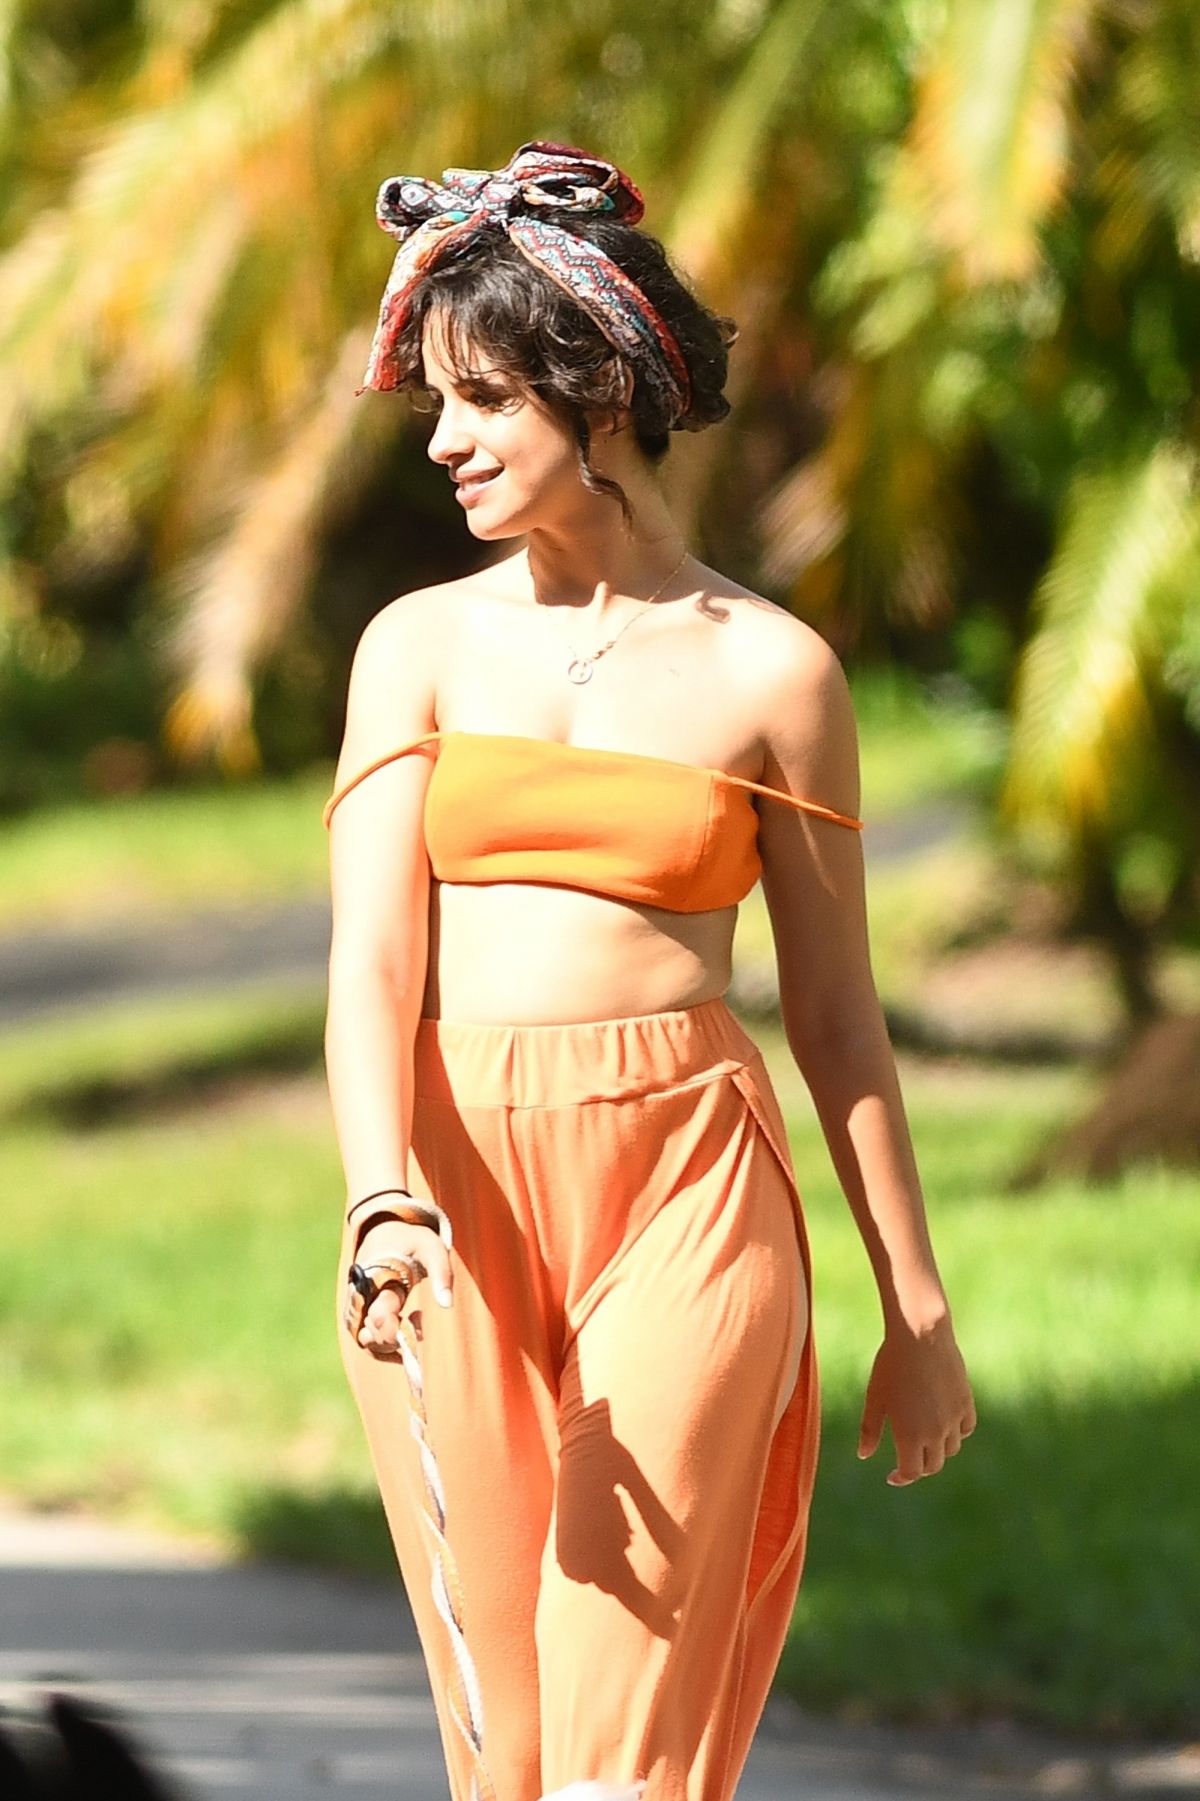 camila-cabello-out-with-her-dogs-in-miami-10-31-2020-4.jpg